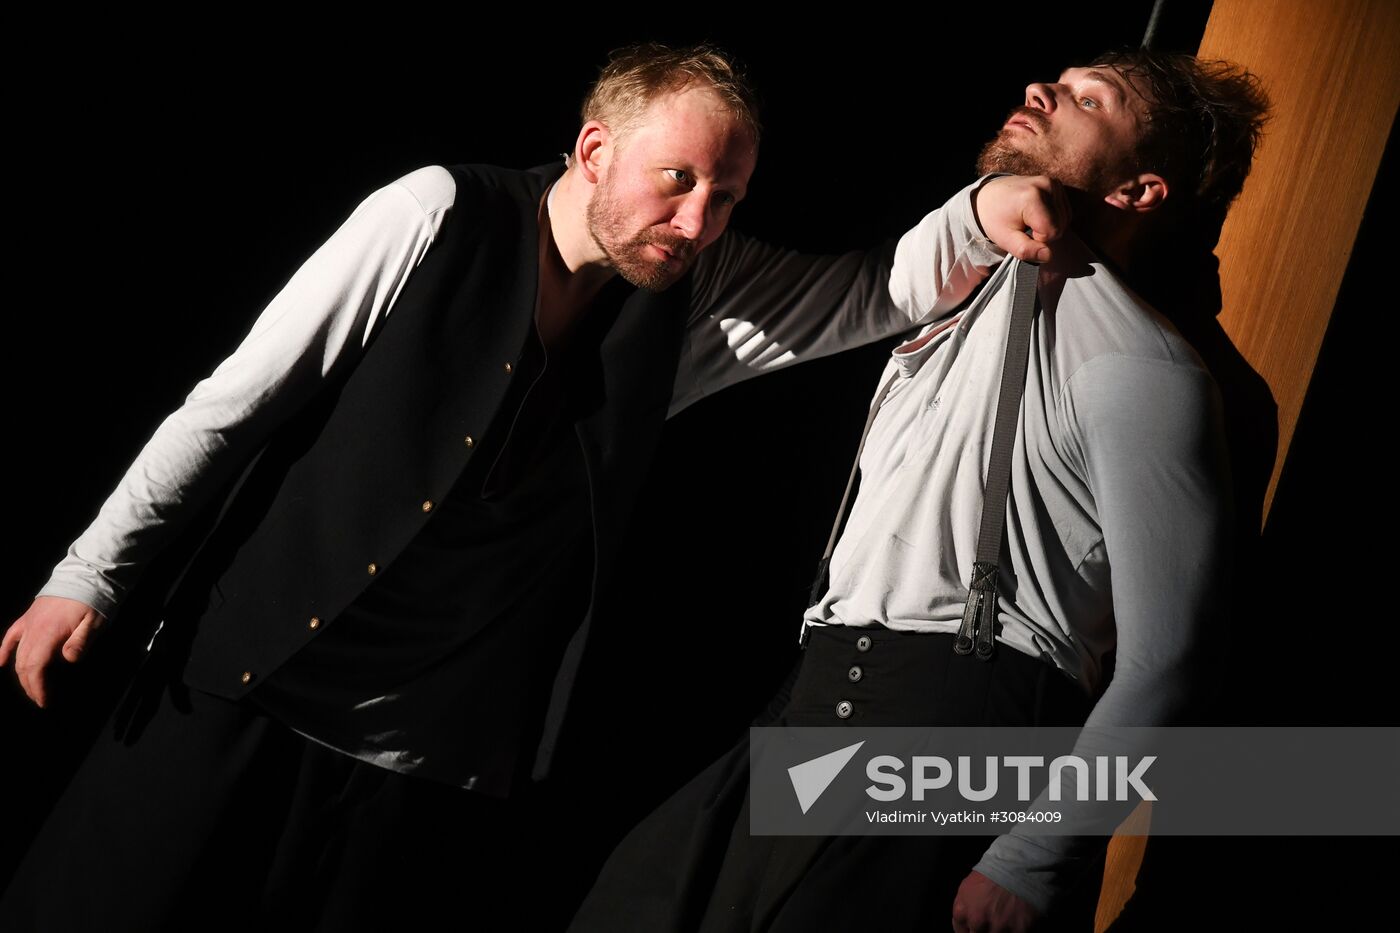 Play "Katerina Ilvovna" staged at Tabakov Theater